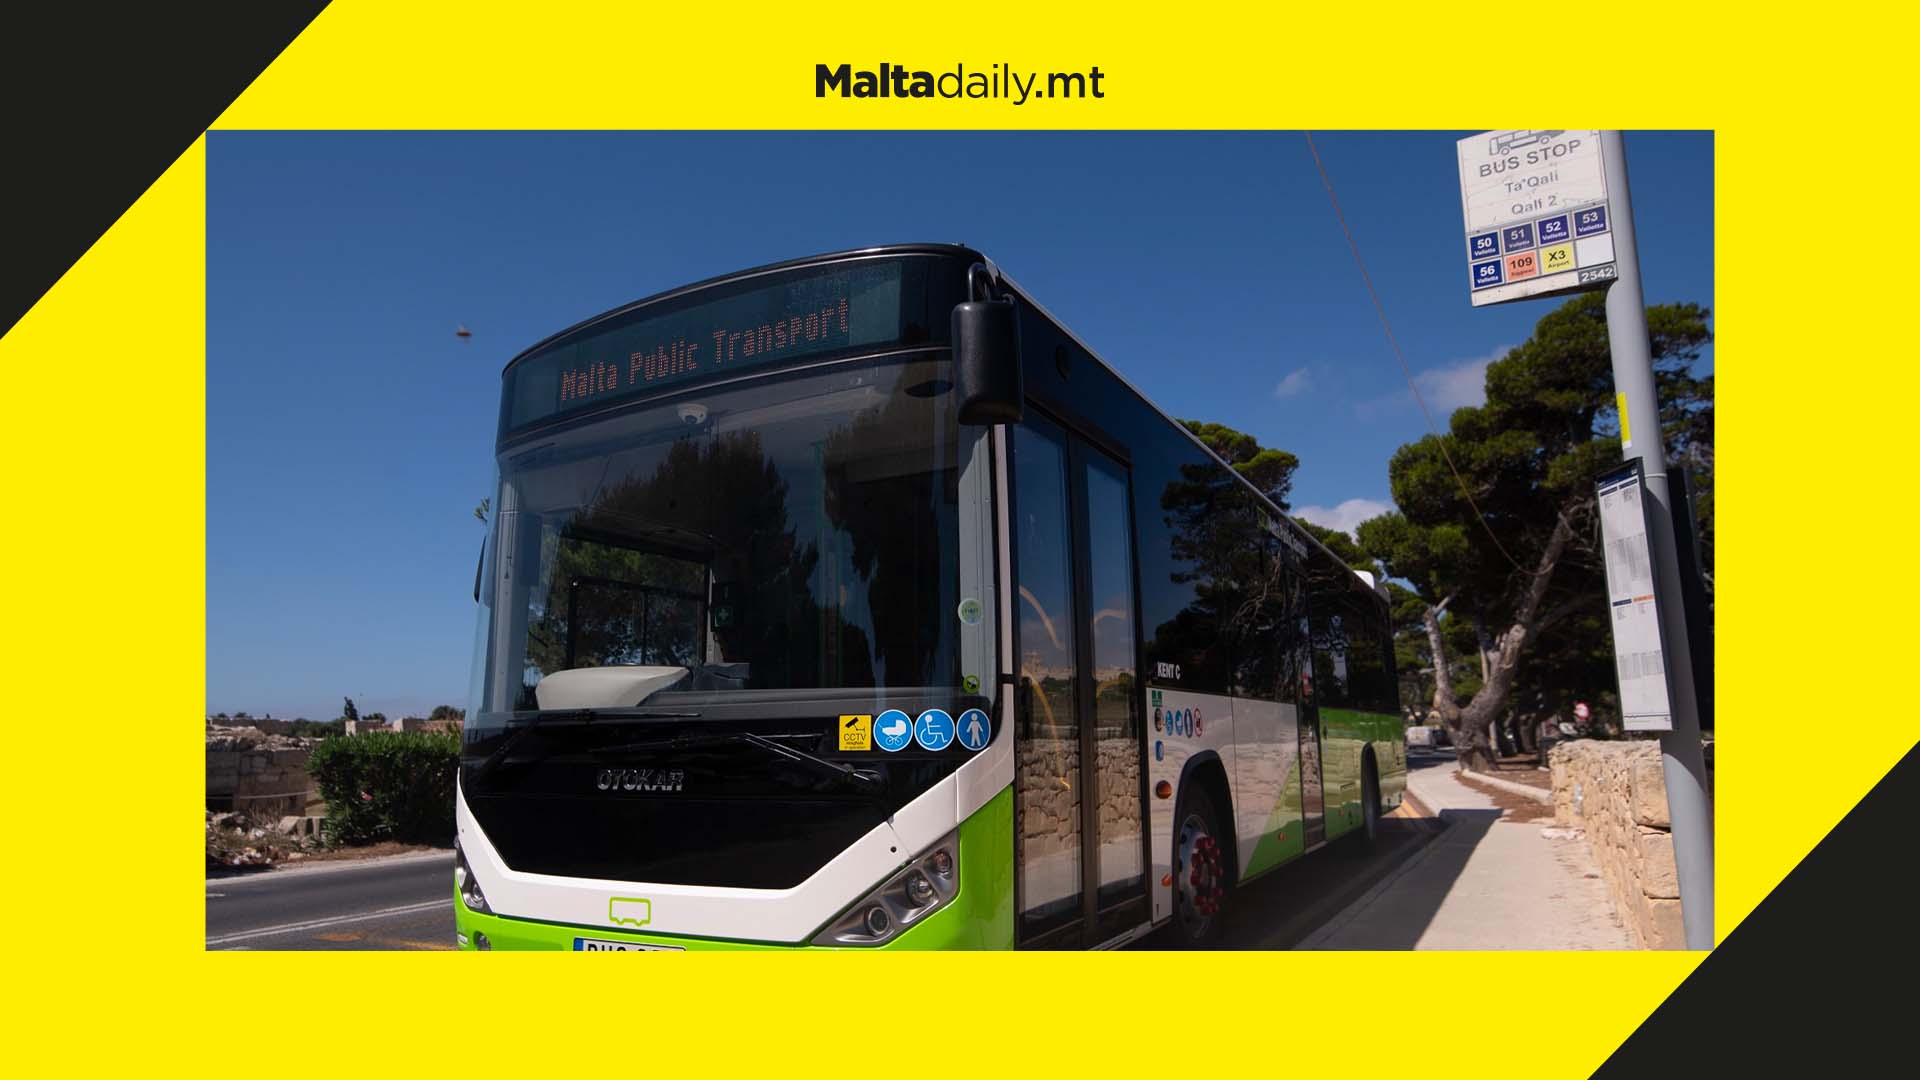 There is a bus stop every 15 minutes in walking distance in Malta